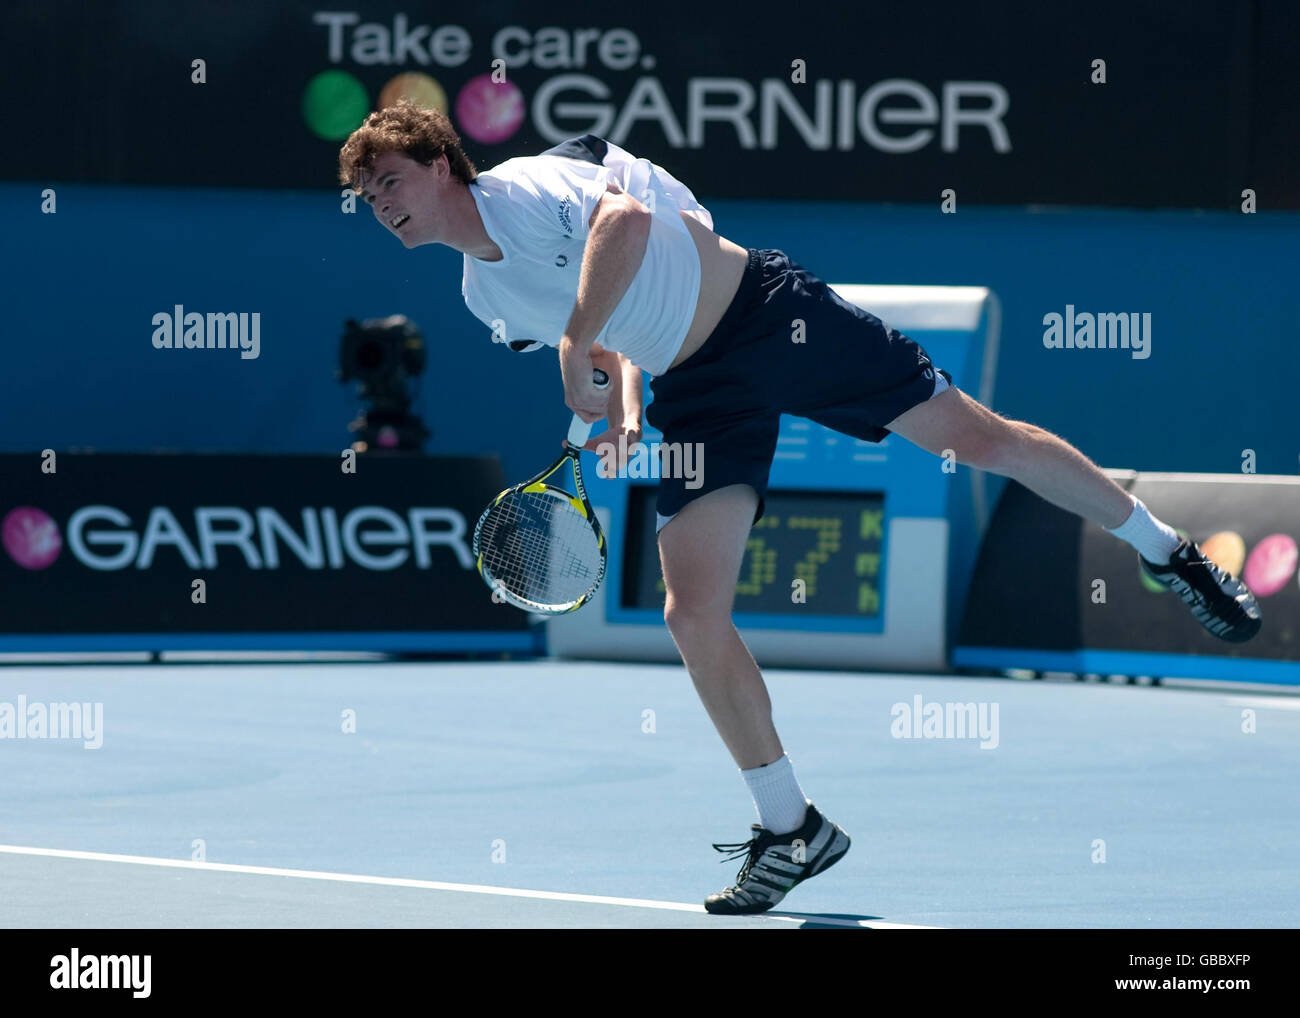 Great Britain's Jamie Murray partners America's Liezel Huber in the mixed doubles against Australia's Sophie Ferguson and Chris Guccione during the Australian Open 2009 at Melbourne Park, Melbourne, Australia. Stock Photo